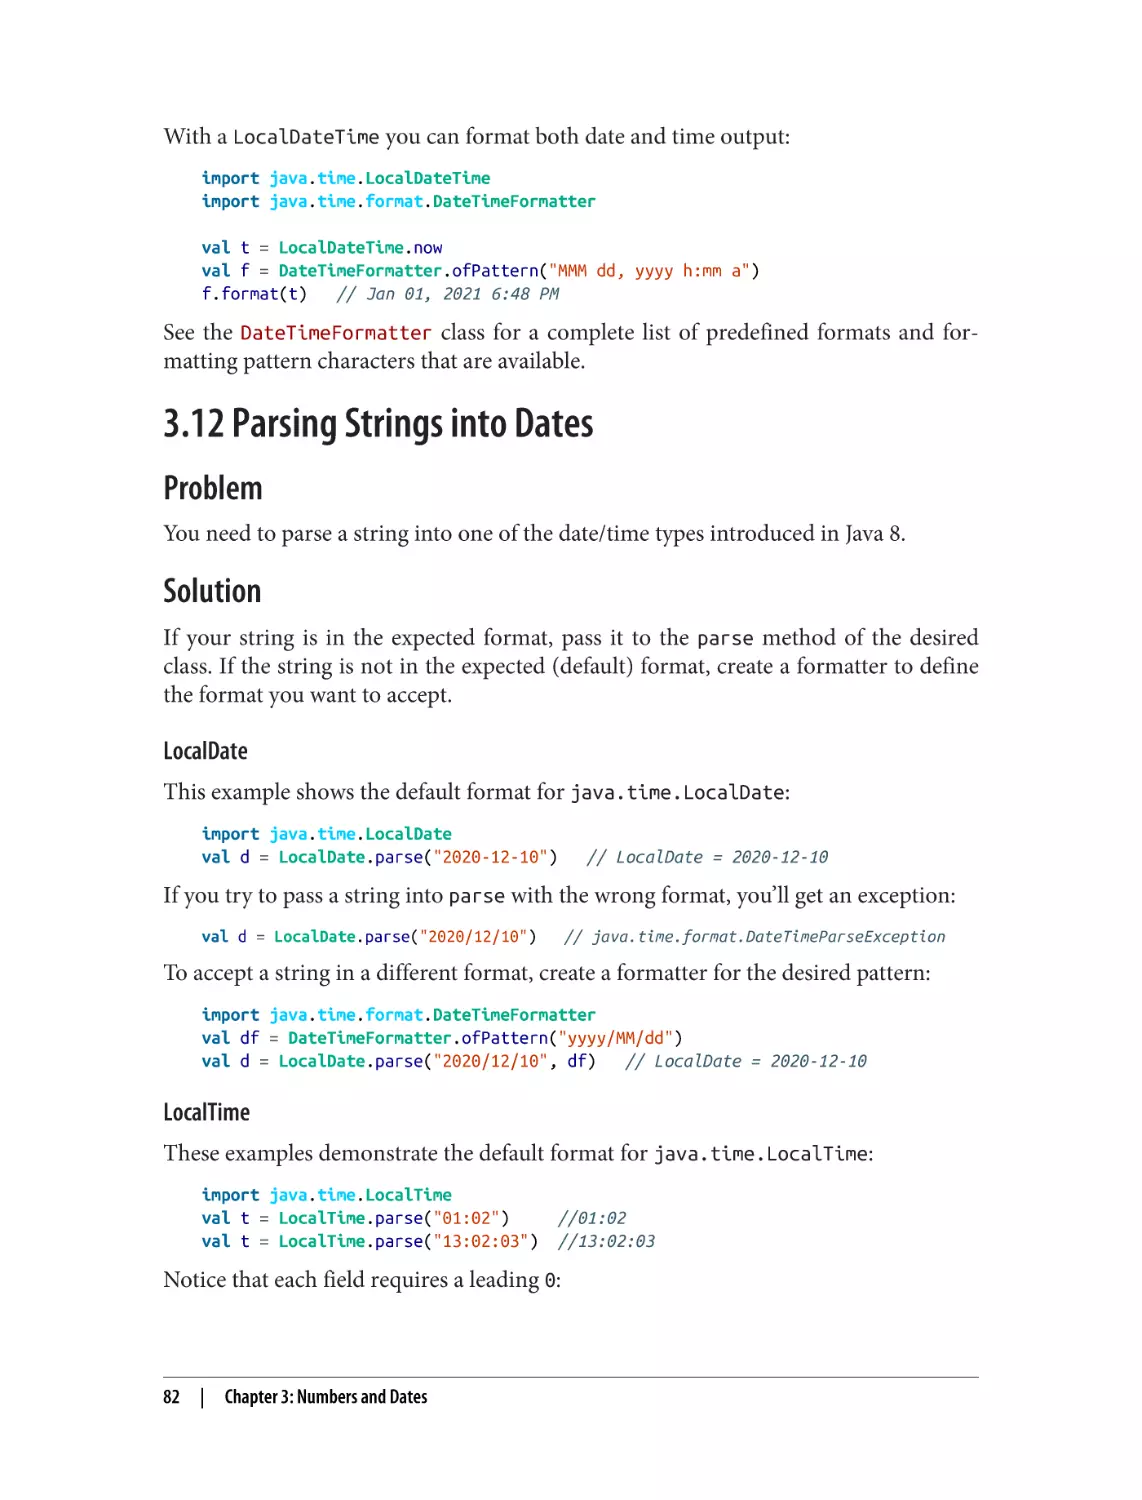 3.12 Parsing Strings into Dates
Problem
Solution